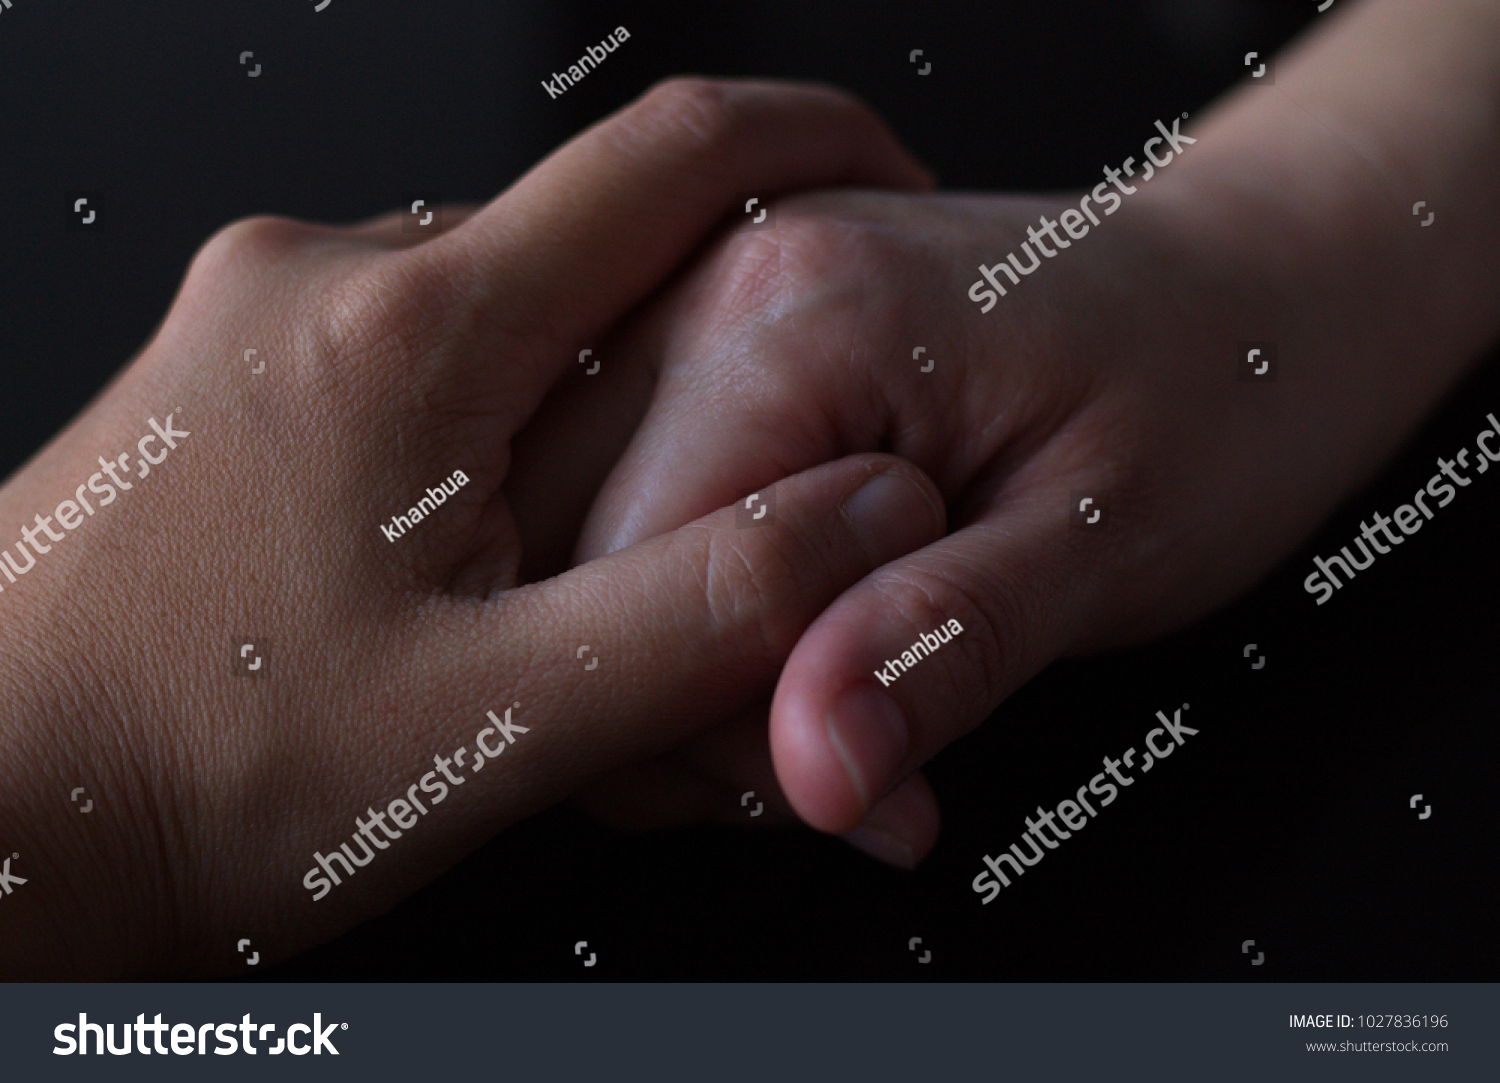 stock-photo-human-hands-holding-each-other-for-encouragement-over-the-black-background-1027836196